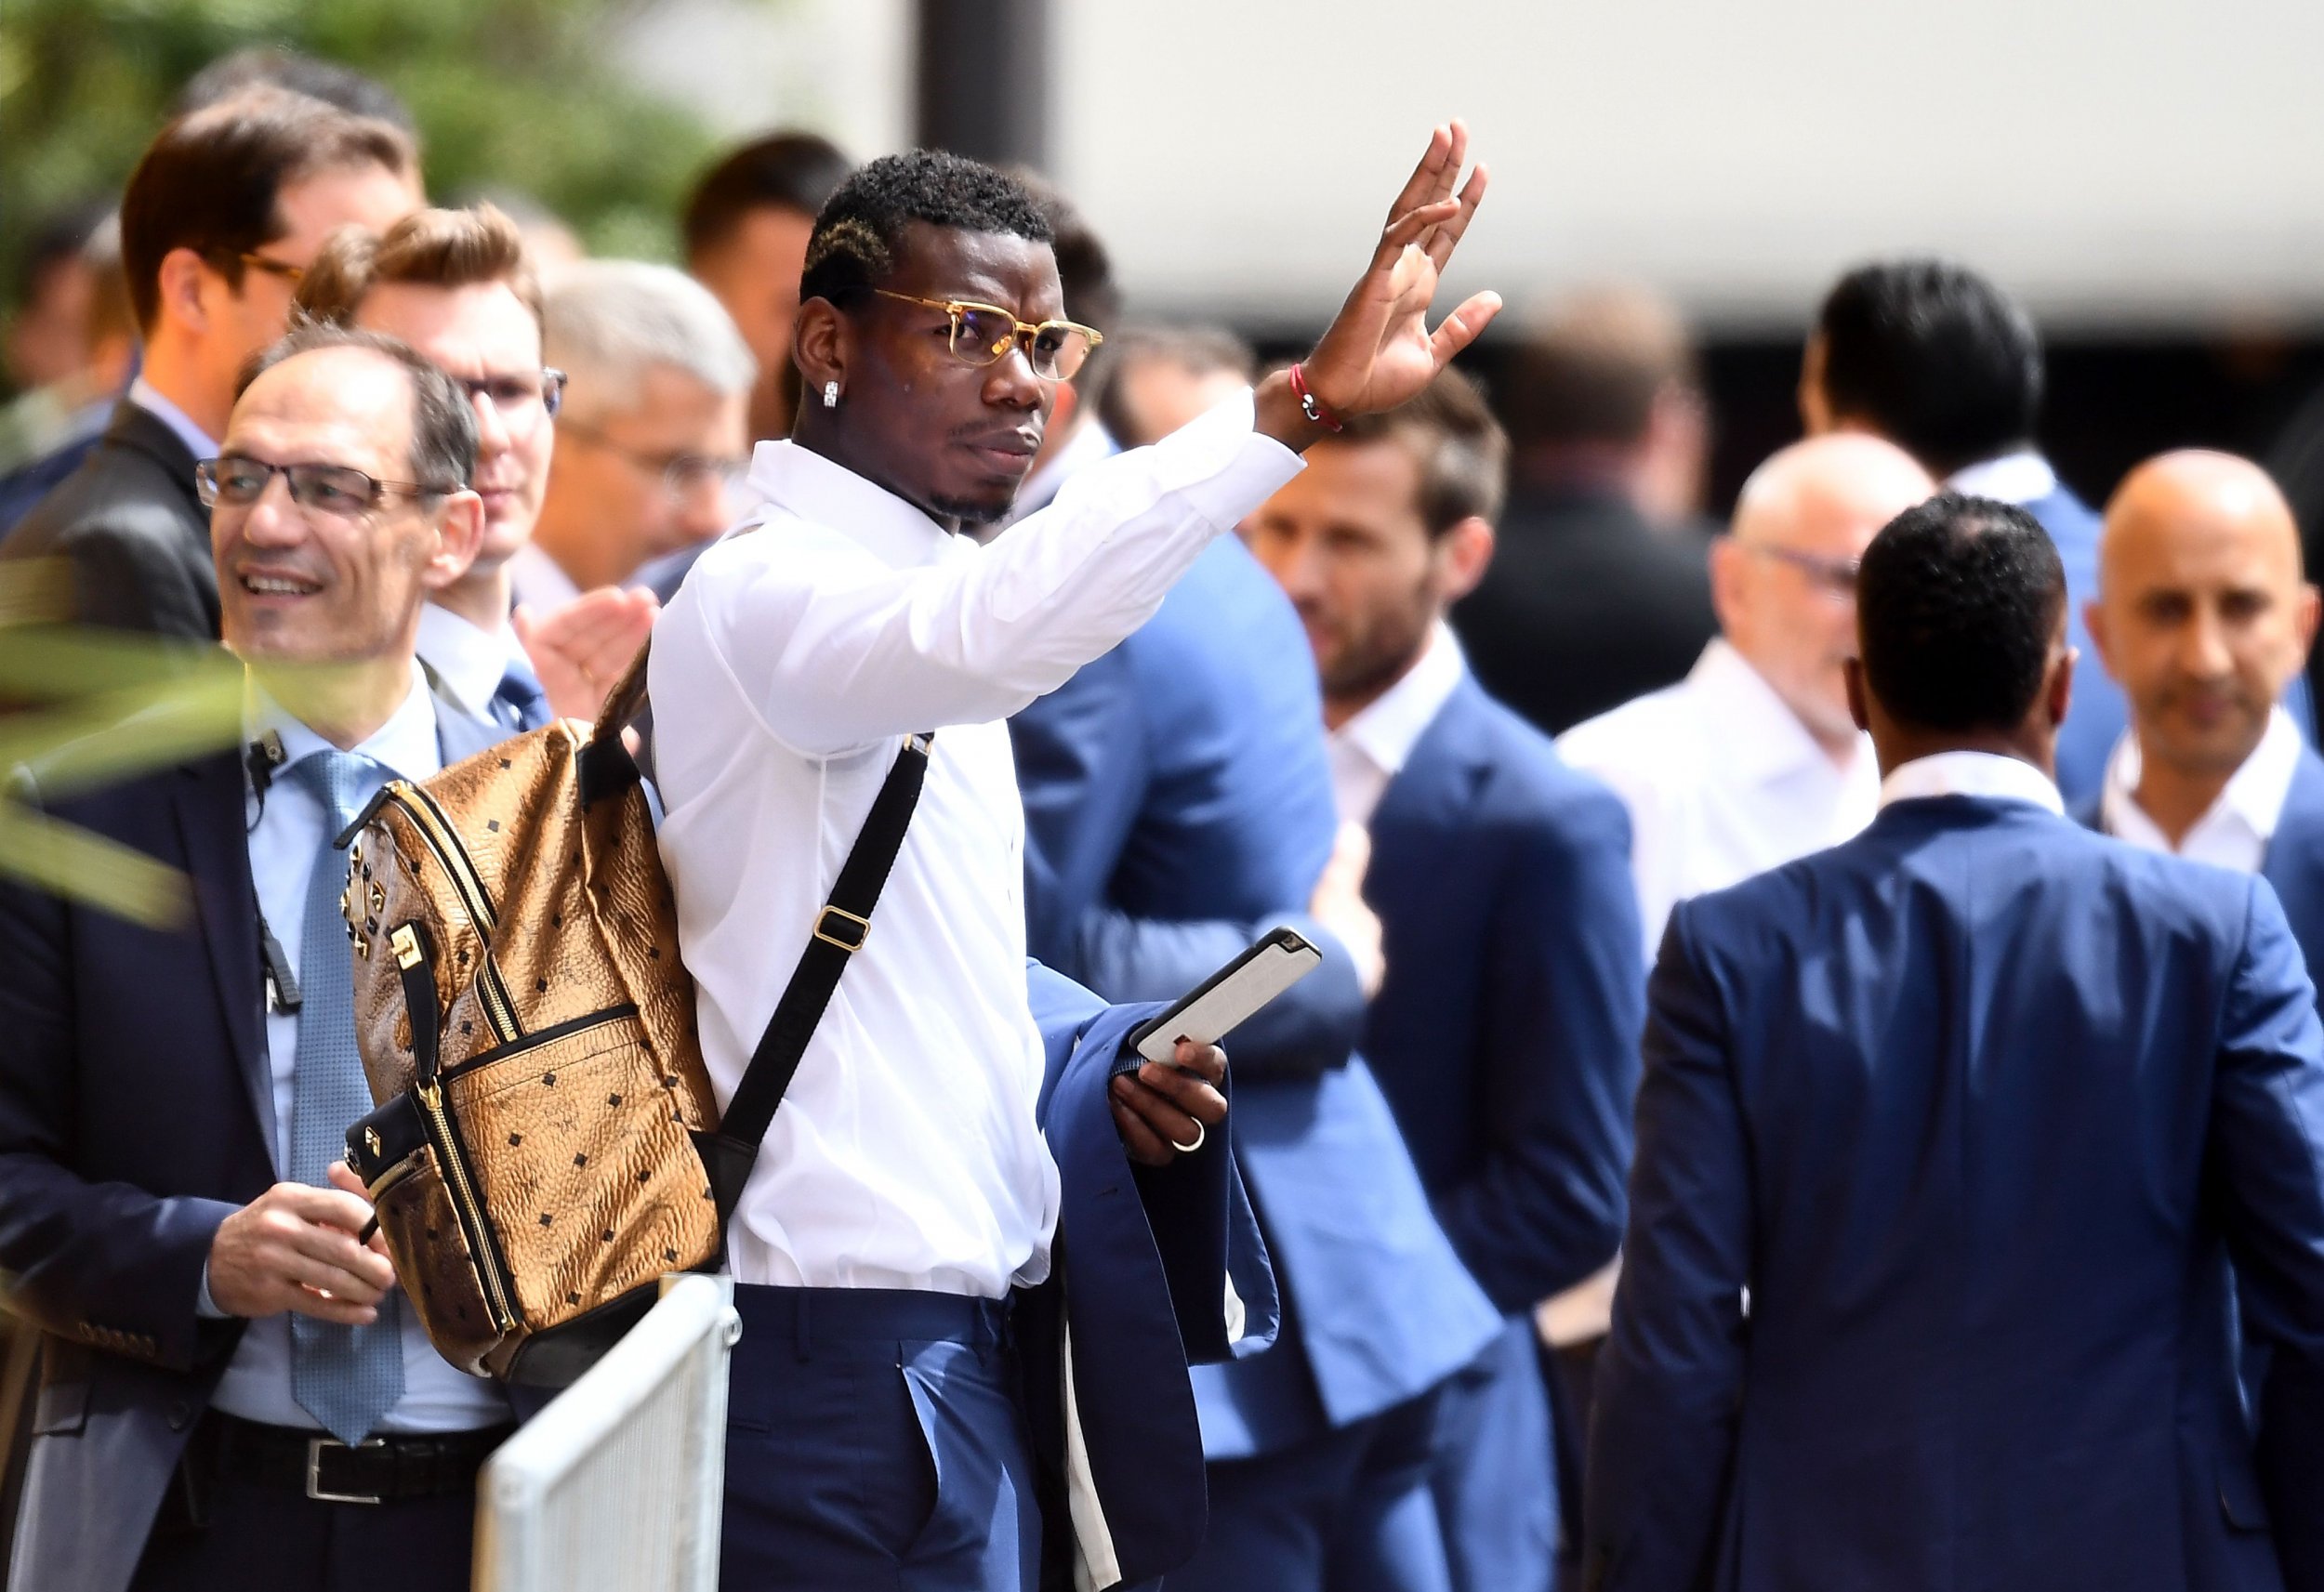 France and Juventus midfielder Paul Pogba